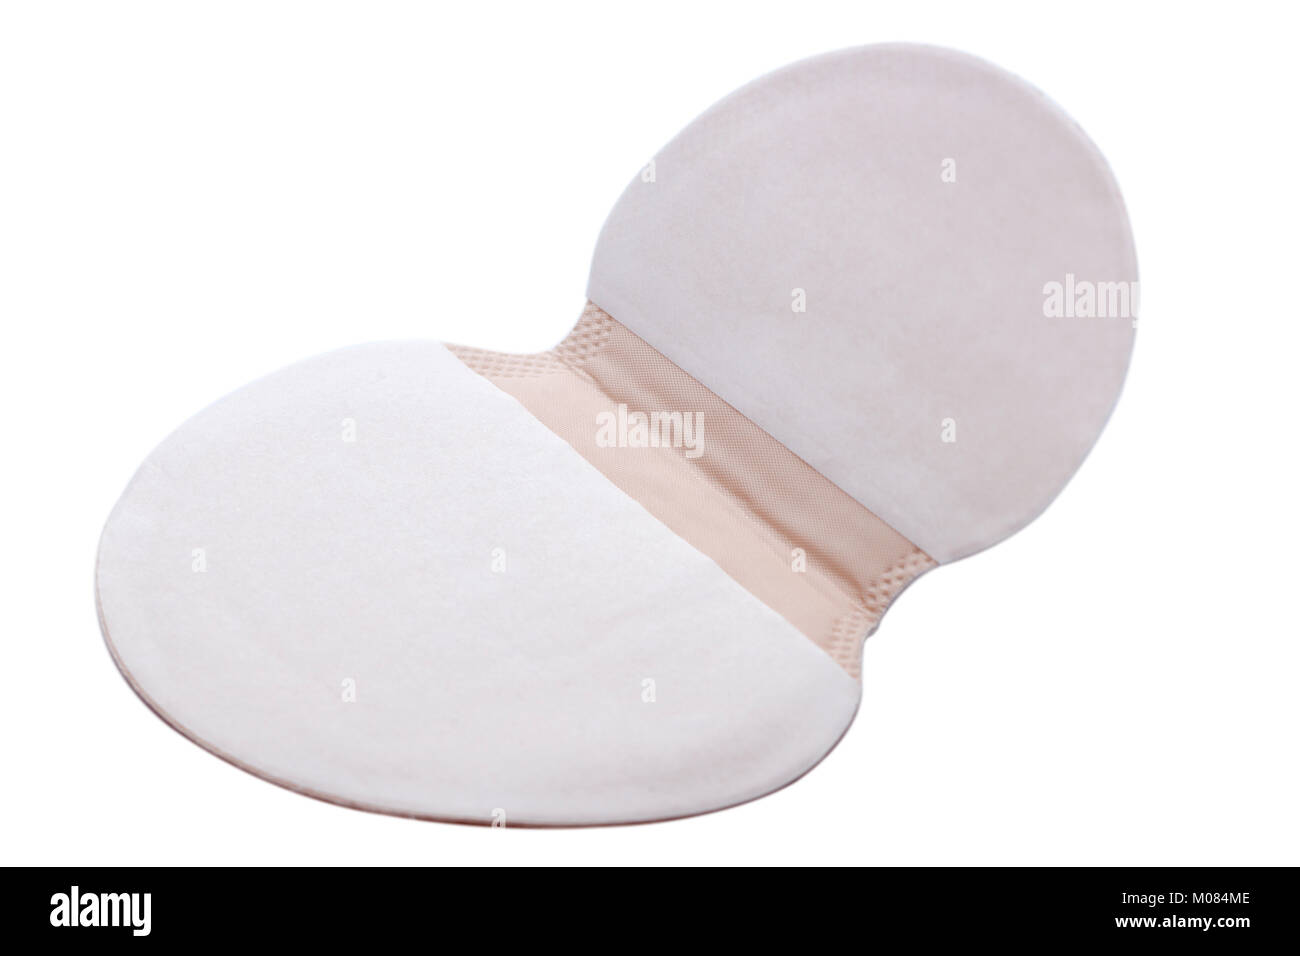 Underarm pad for sweat protection Stock Photo